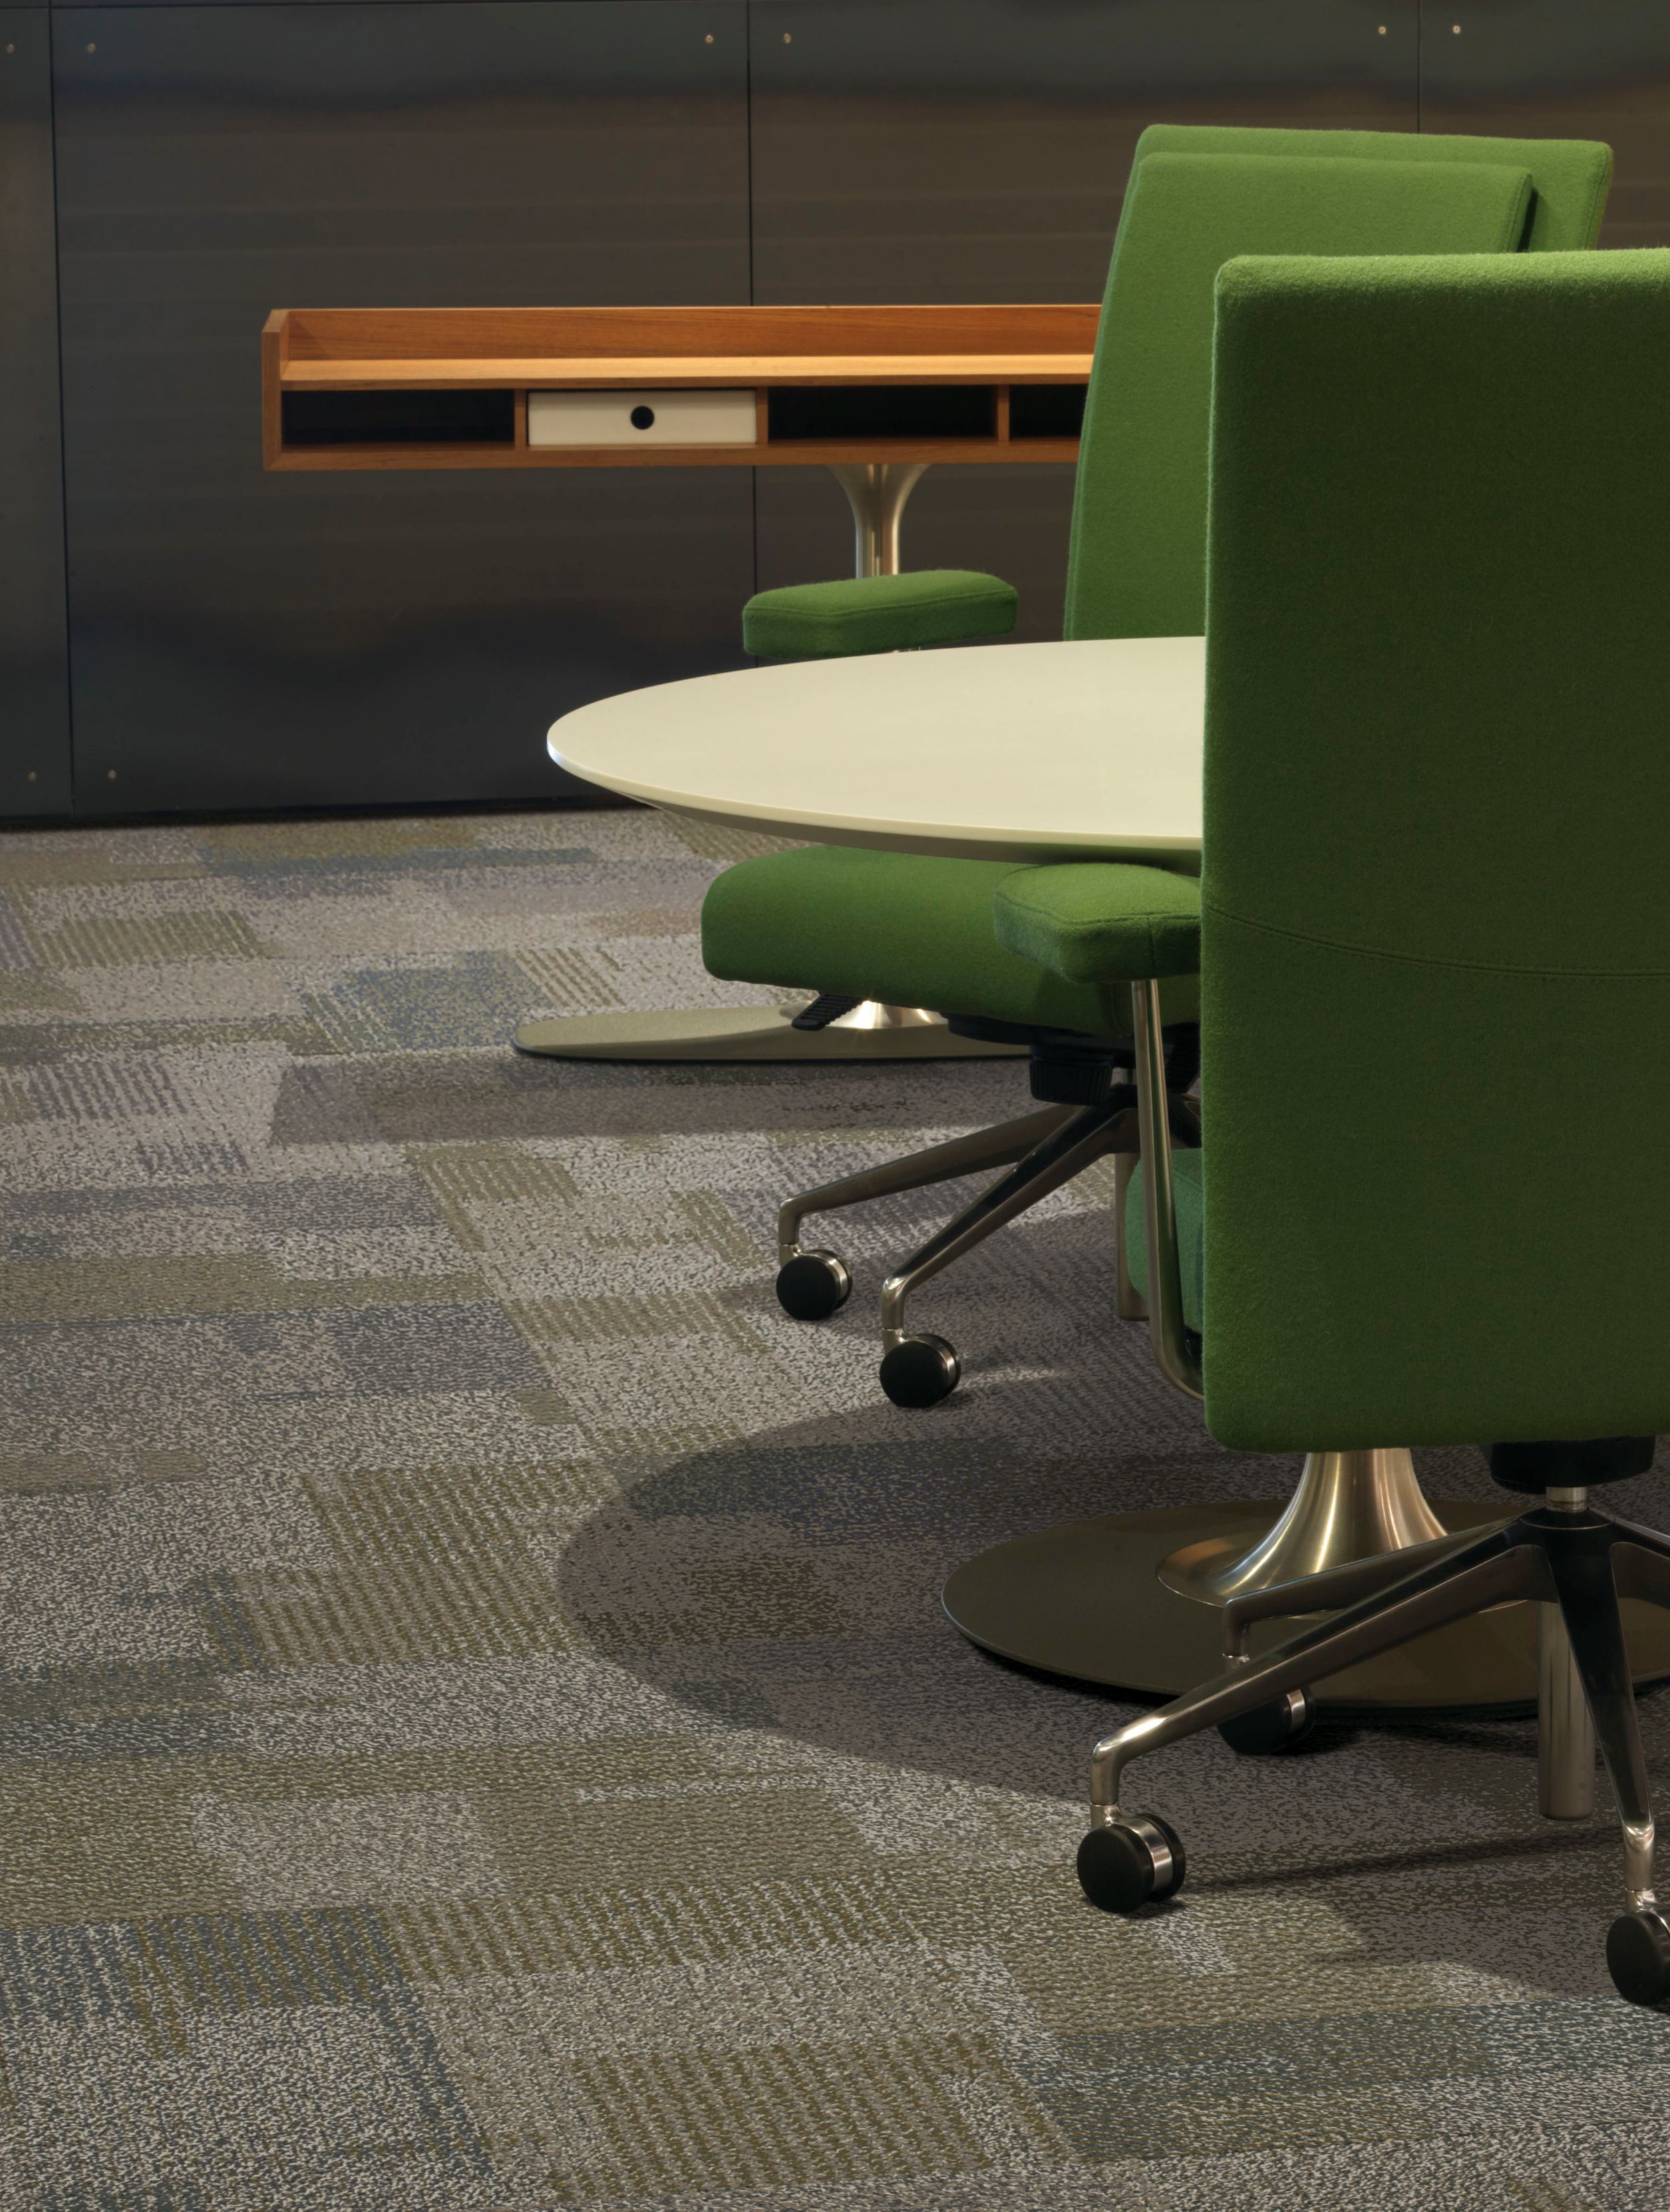 Interface Entropy carpet tile in room with green chairs and wooden shelf in background imagen número 7